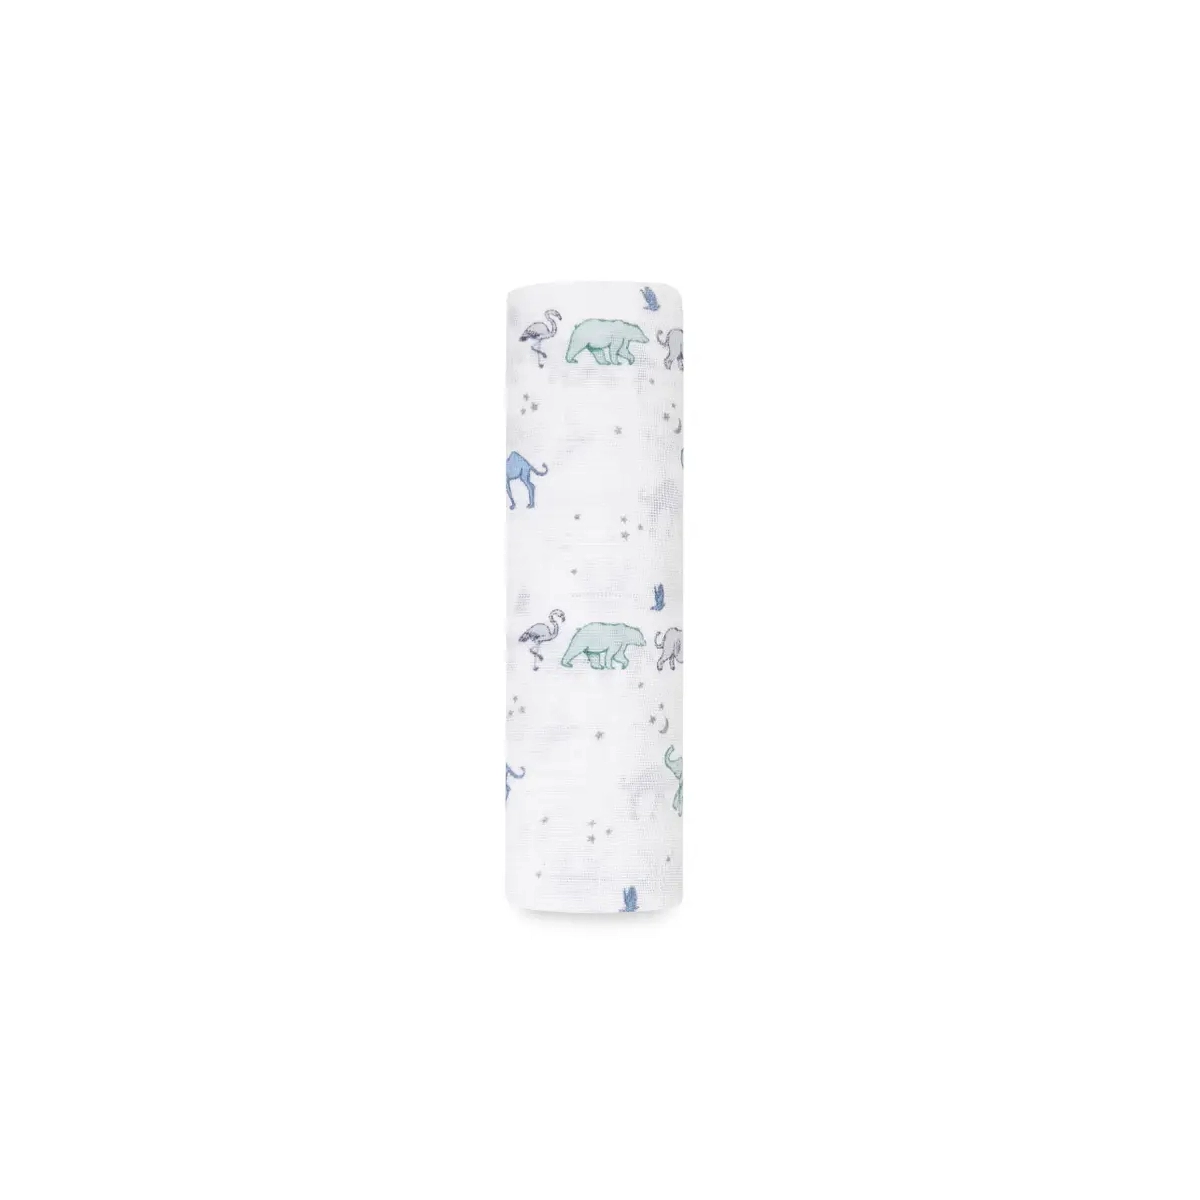 Image of Aden + Anais Large Swaddle Cotton Muslin - Rising Star/Follow The Stars (23-19-067)